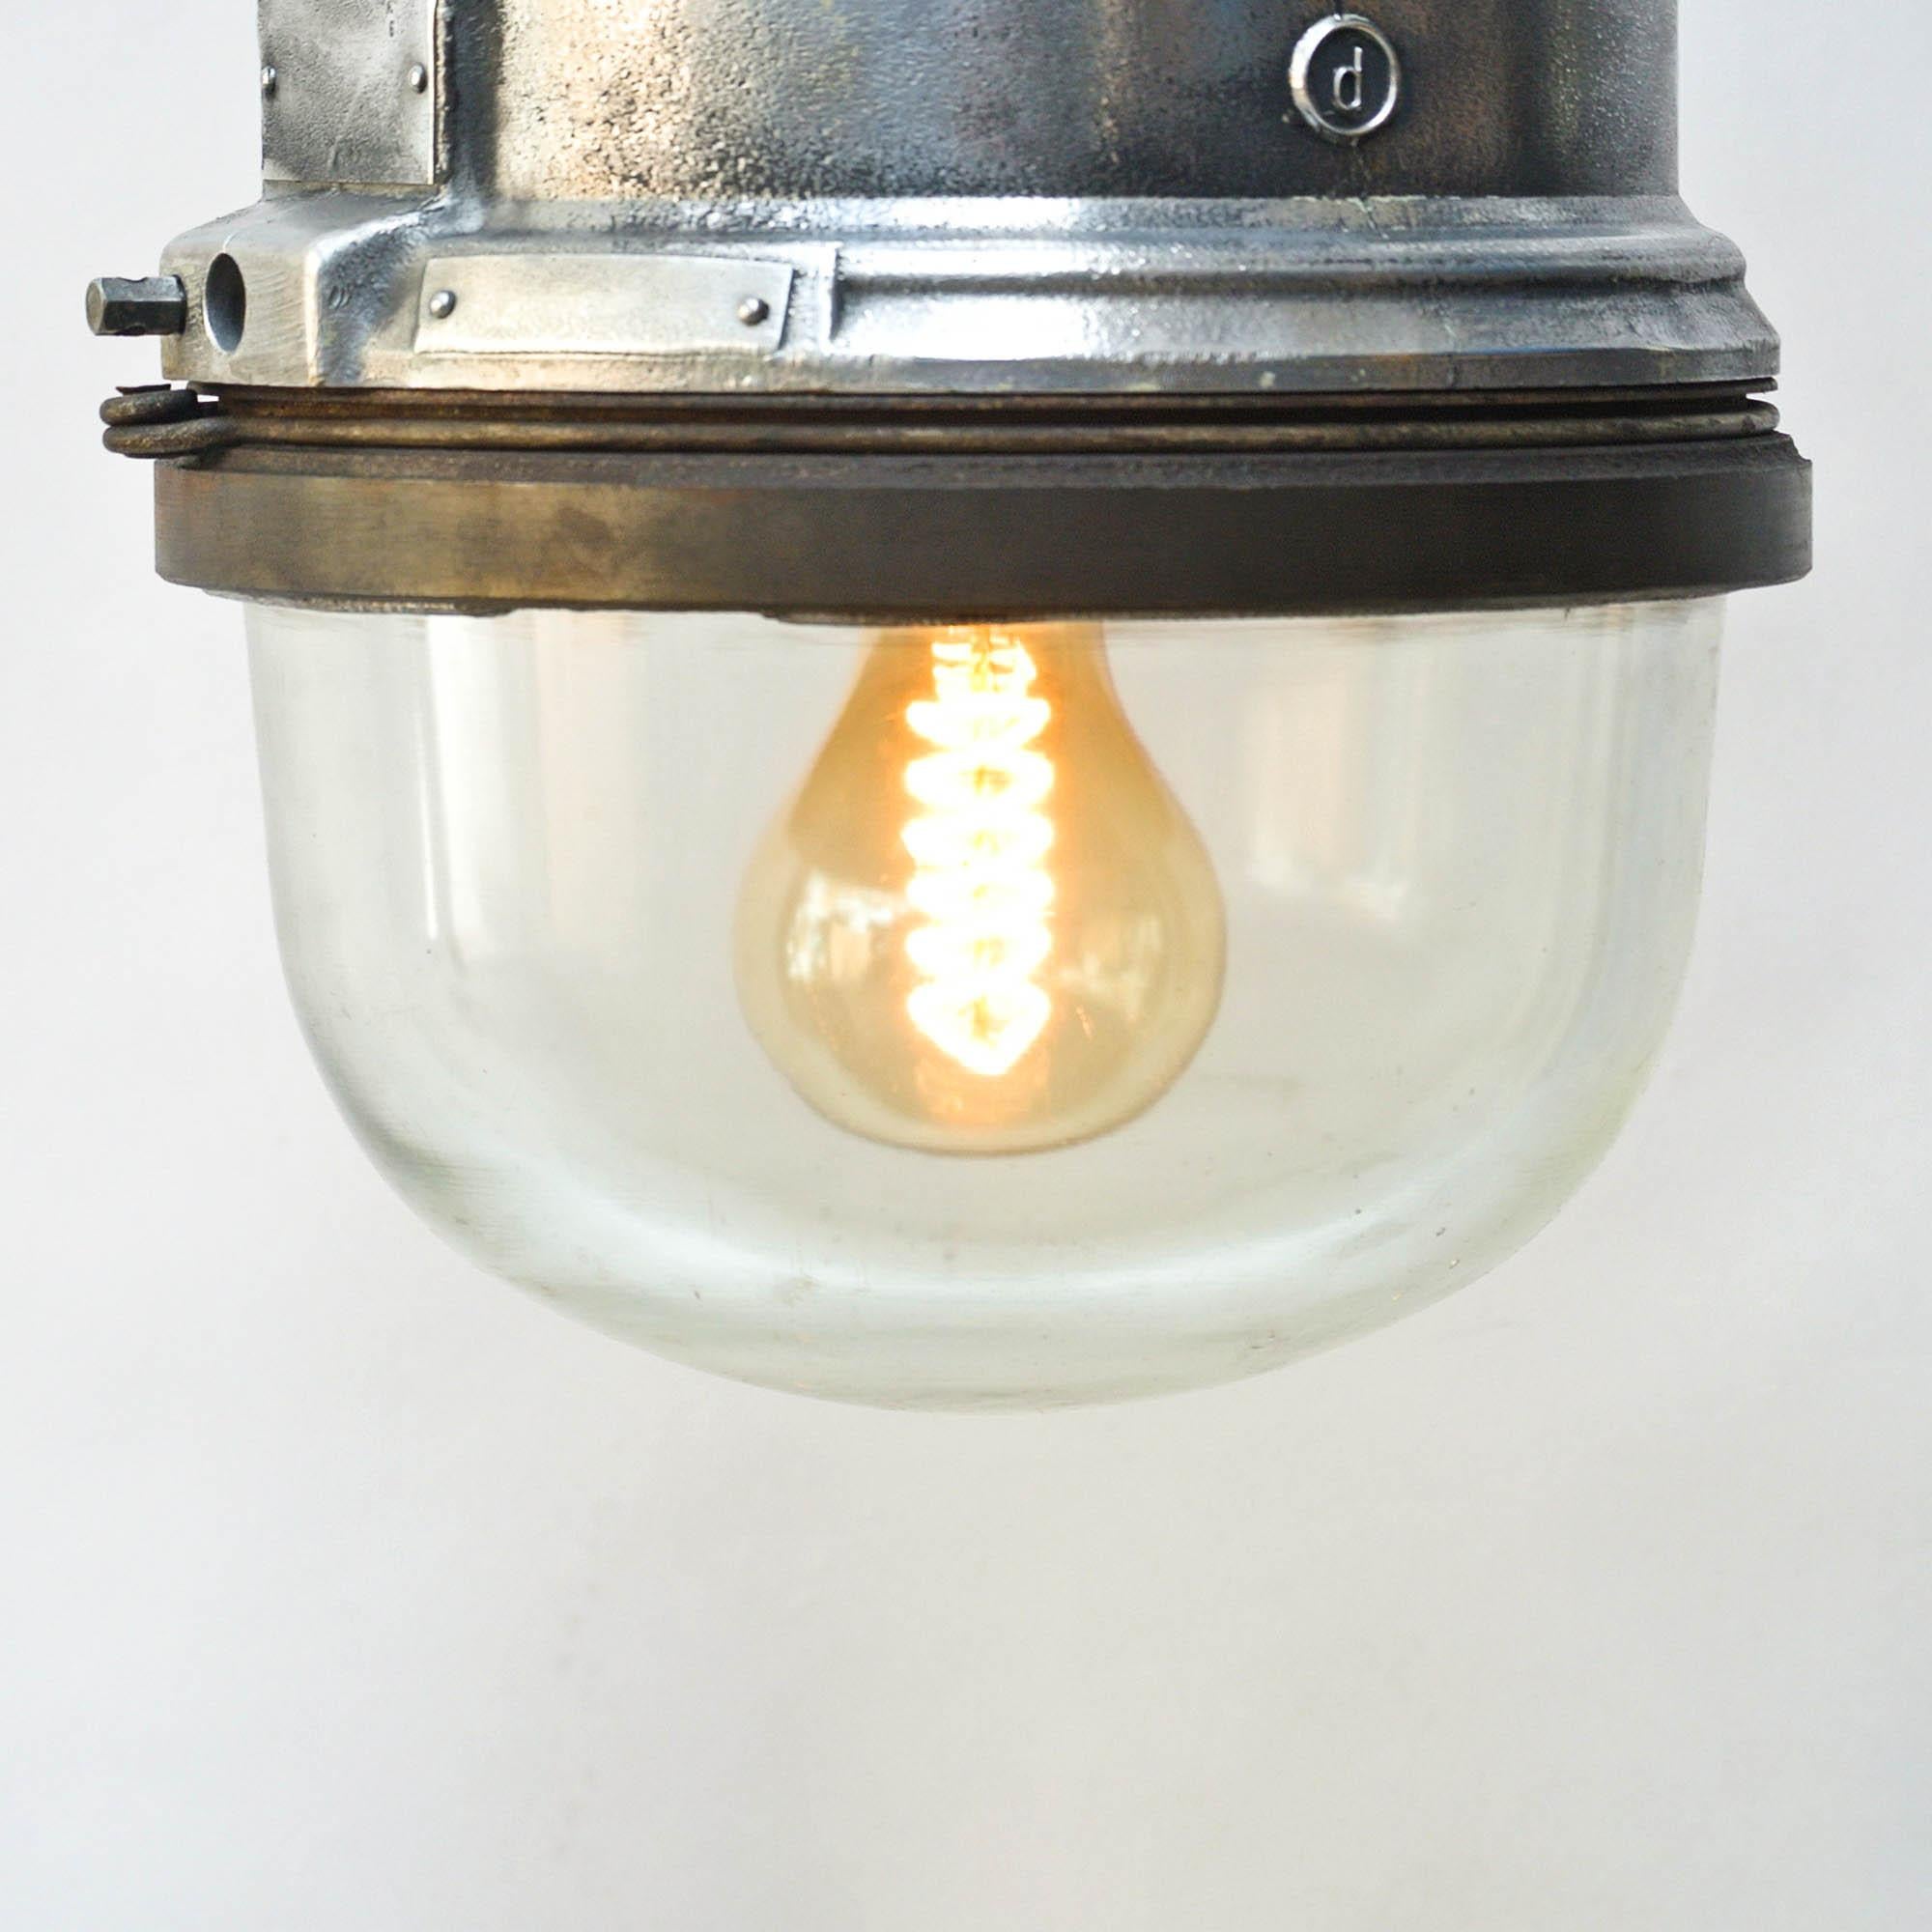 Explosion-Proof Light Used in Chemical Industry Germany, circa 1960-1969 In Good Condition For Sale In Saint Ouen, FR